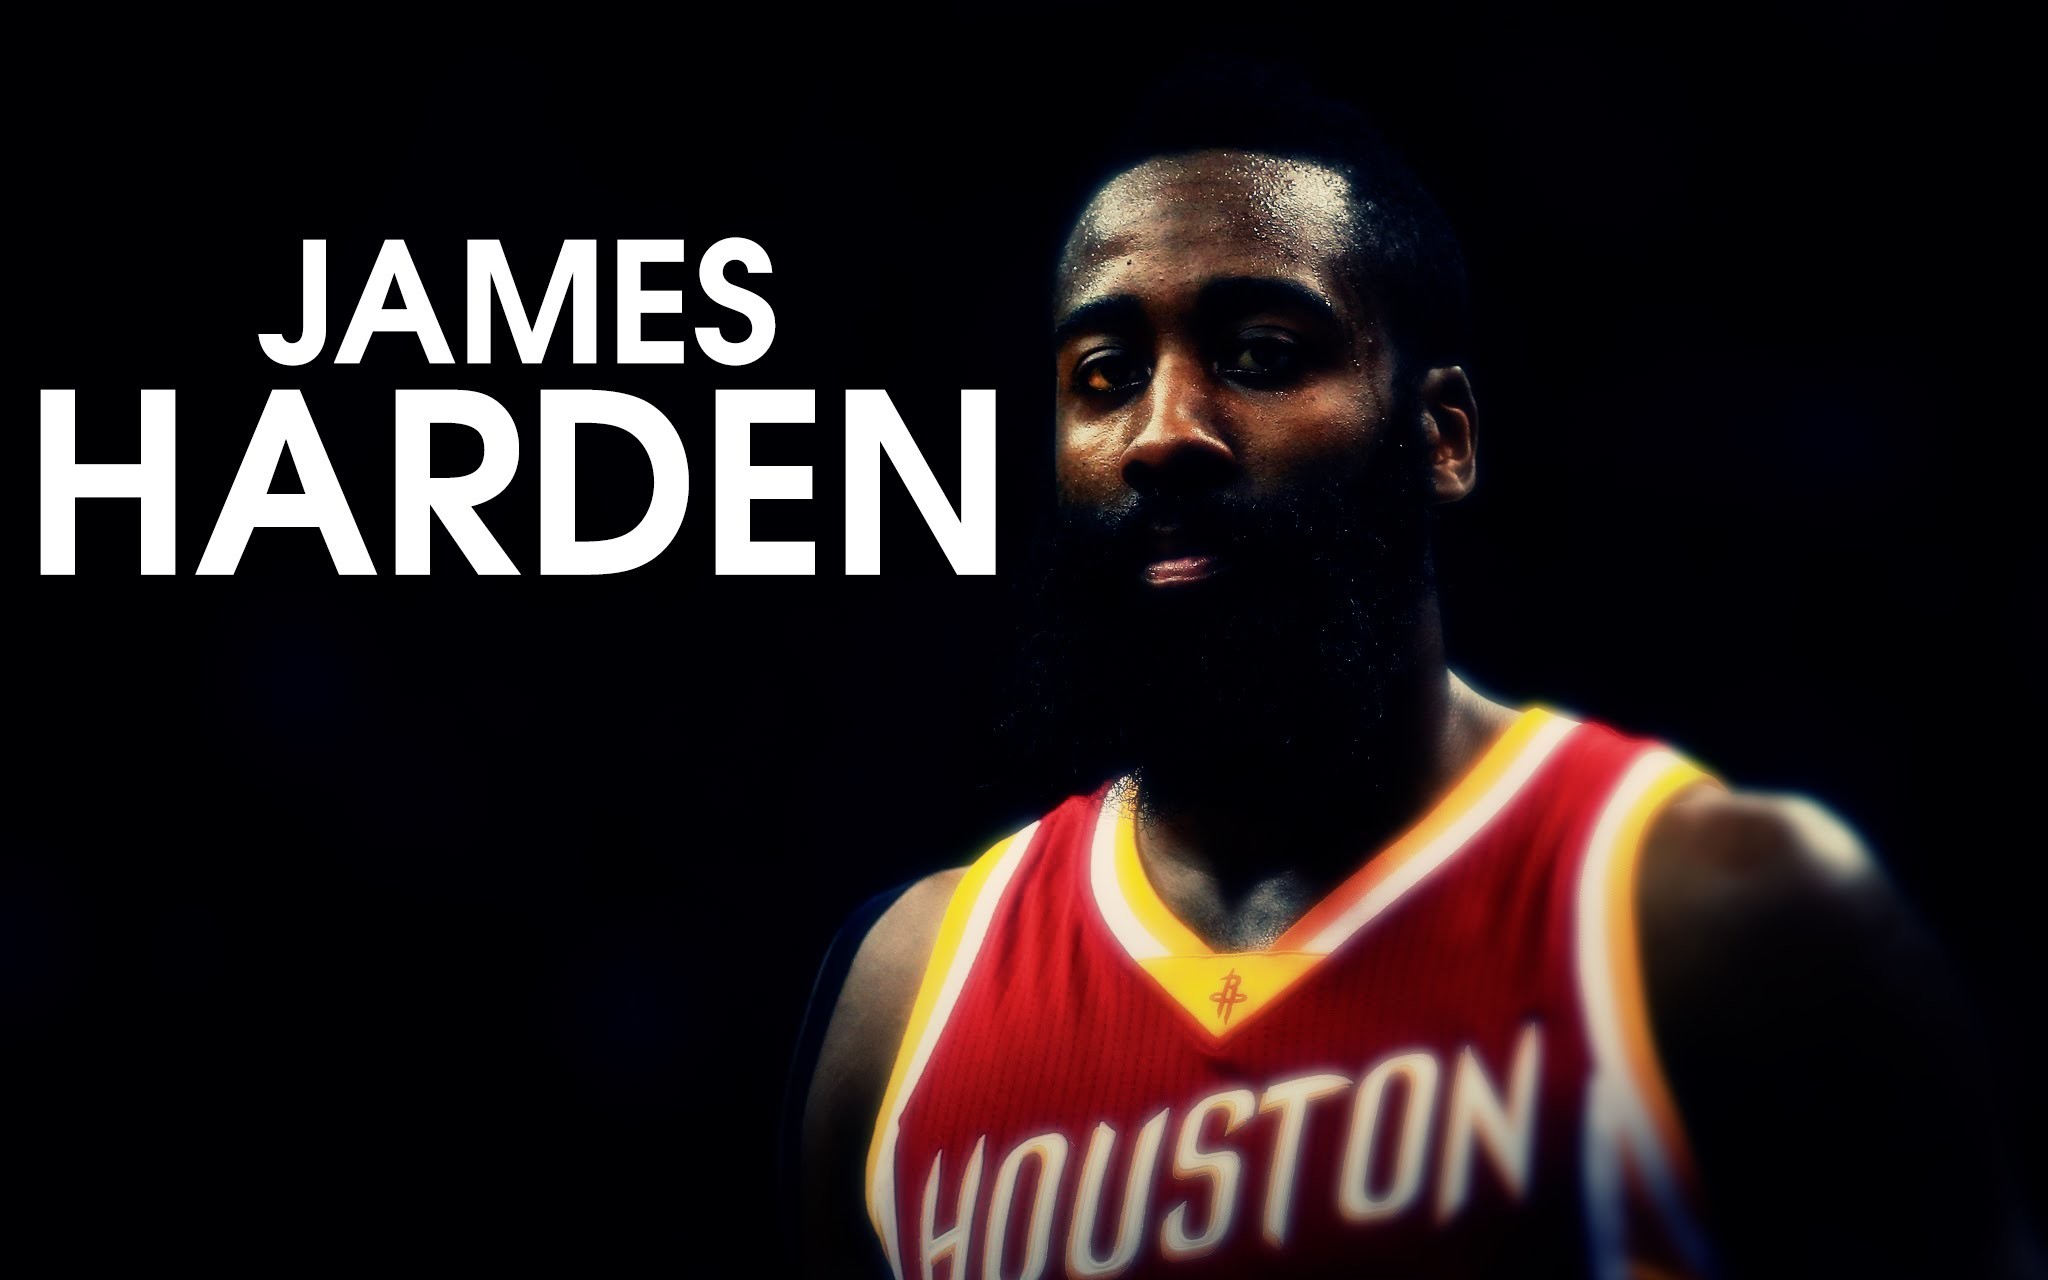 2048x1280 James Harden Wallpapers High Resolution and Quality Download